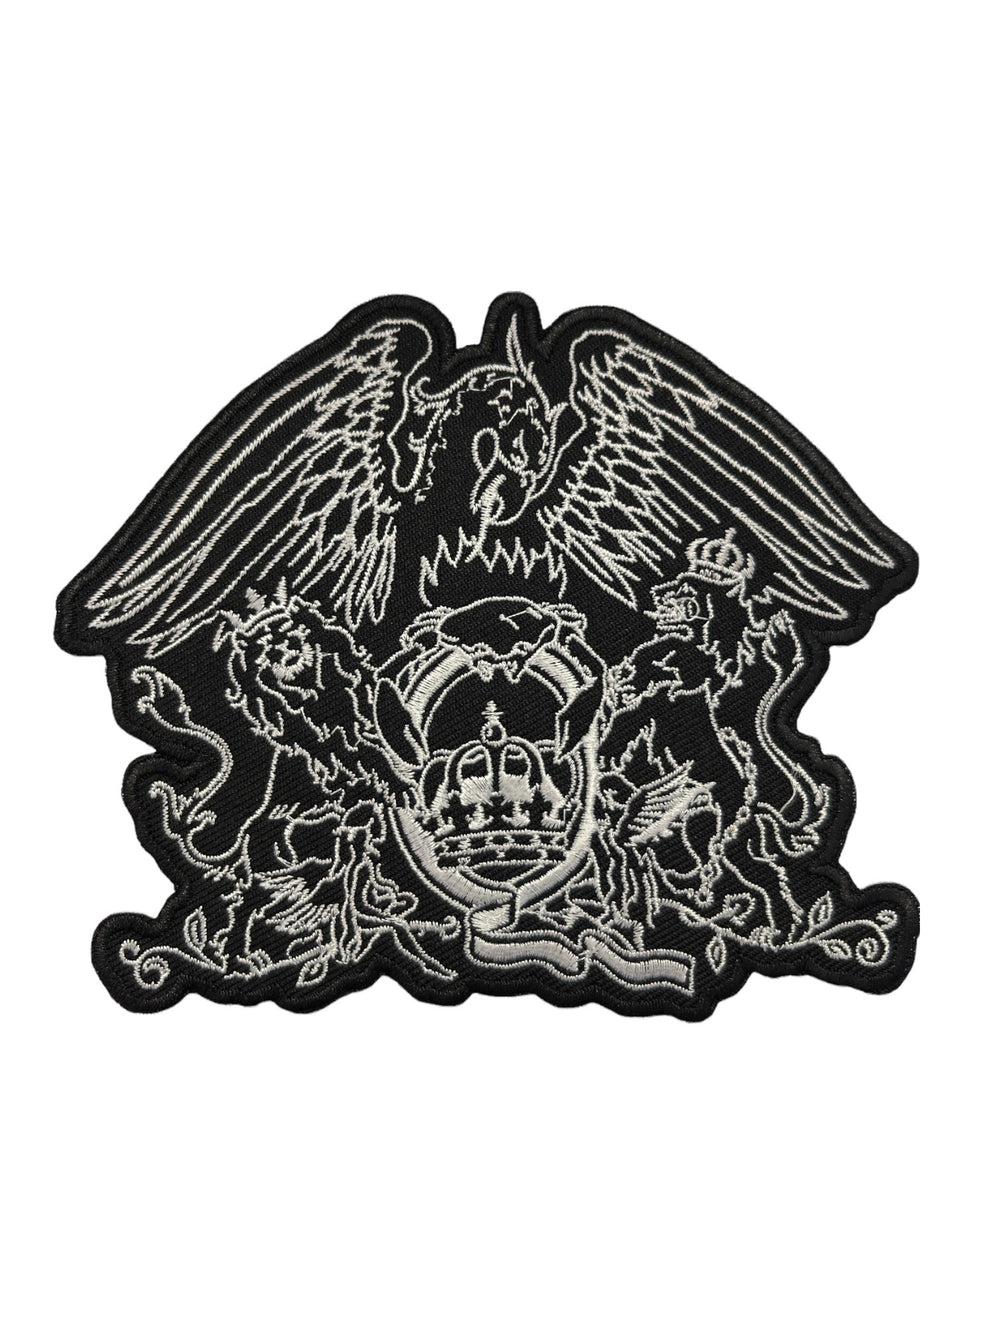 Queen Standard Patch: Cut-Out Crest Official Woven Patch Brand New